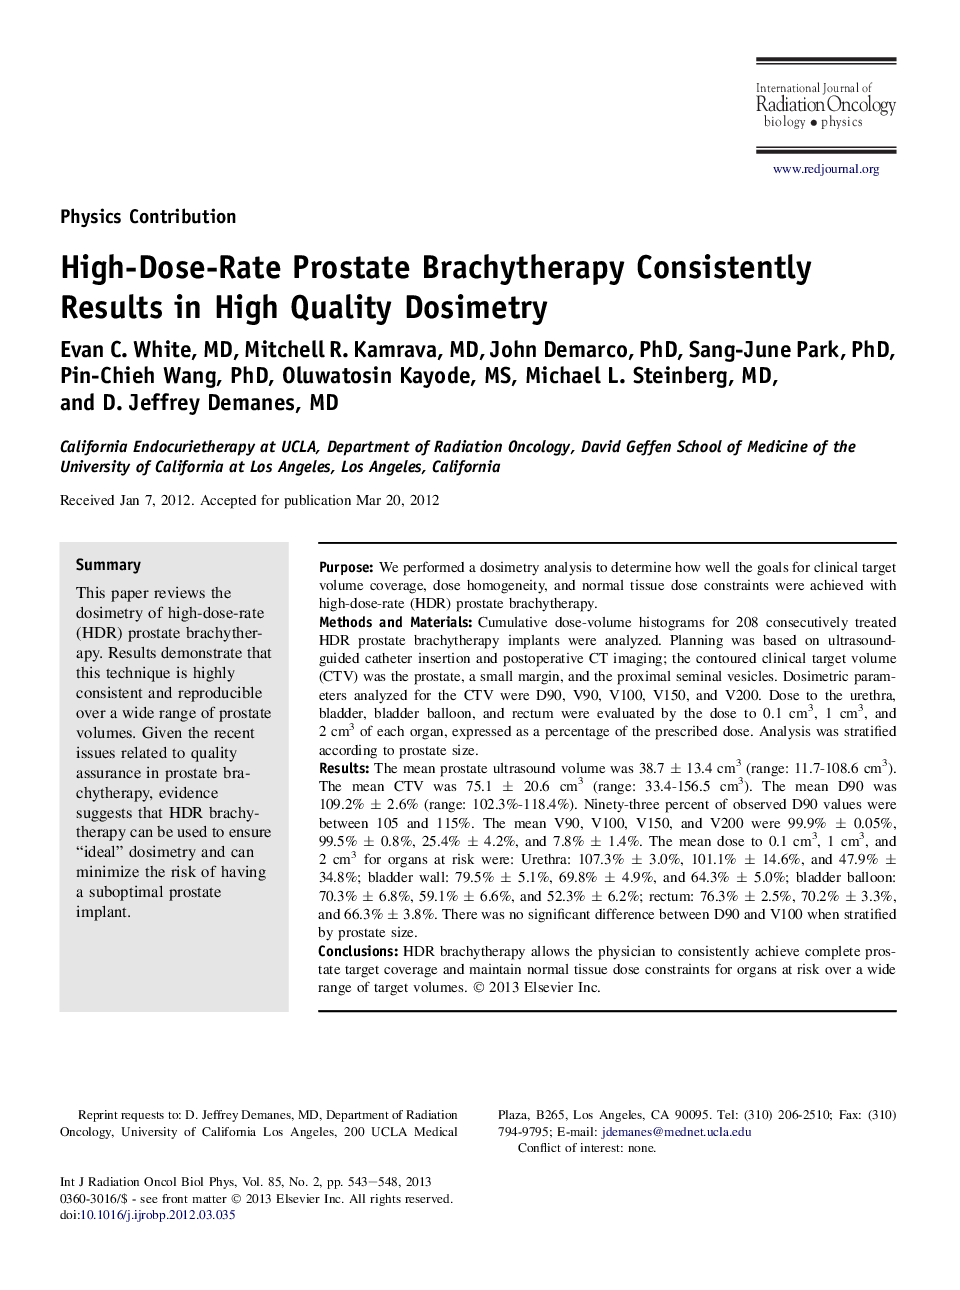 High-Dose-Rate Prostate Brachytherapy Consistently Results in High Quality Dosimetry